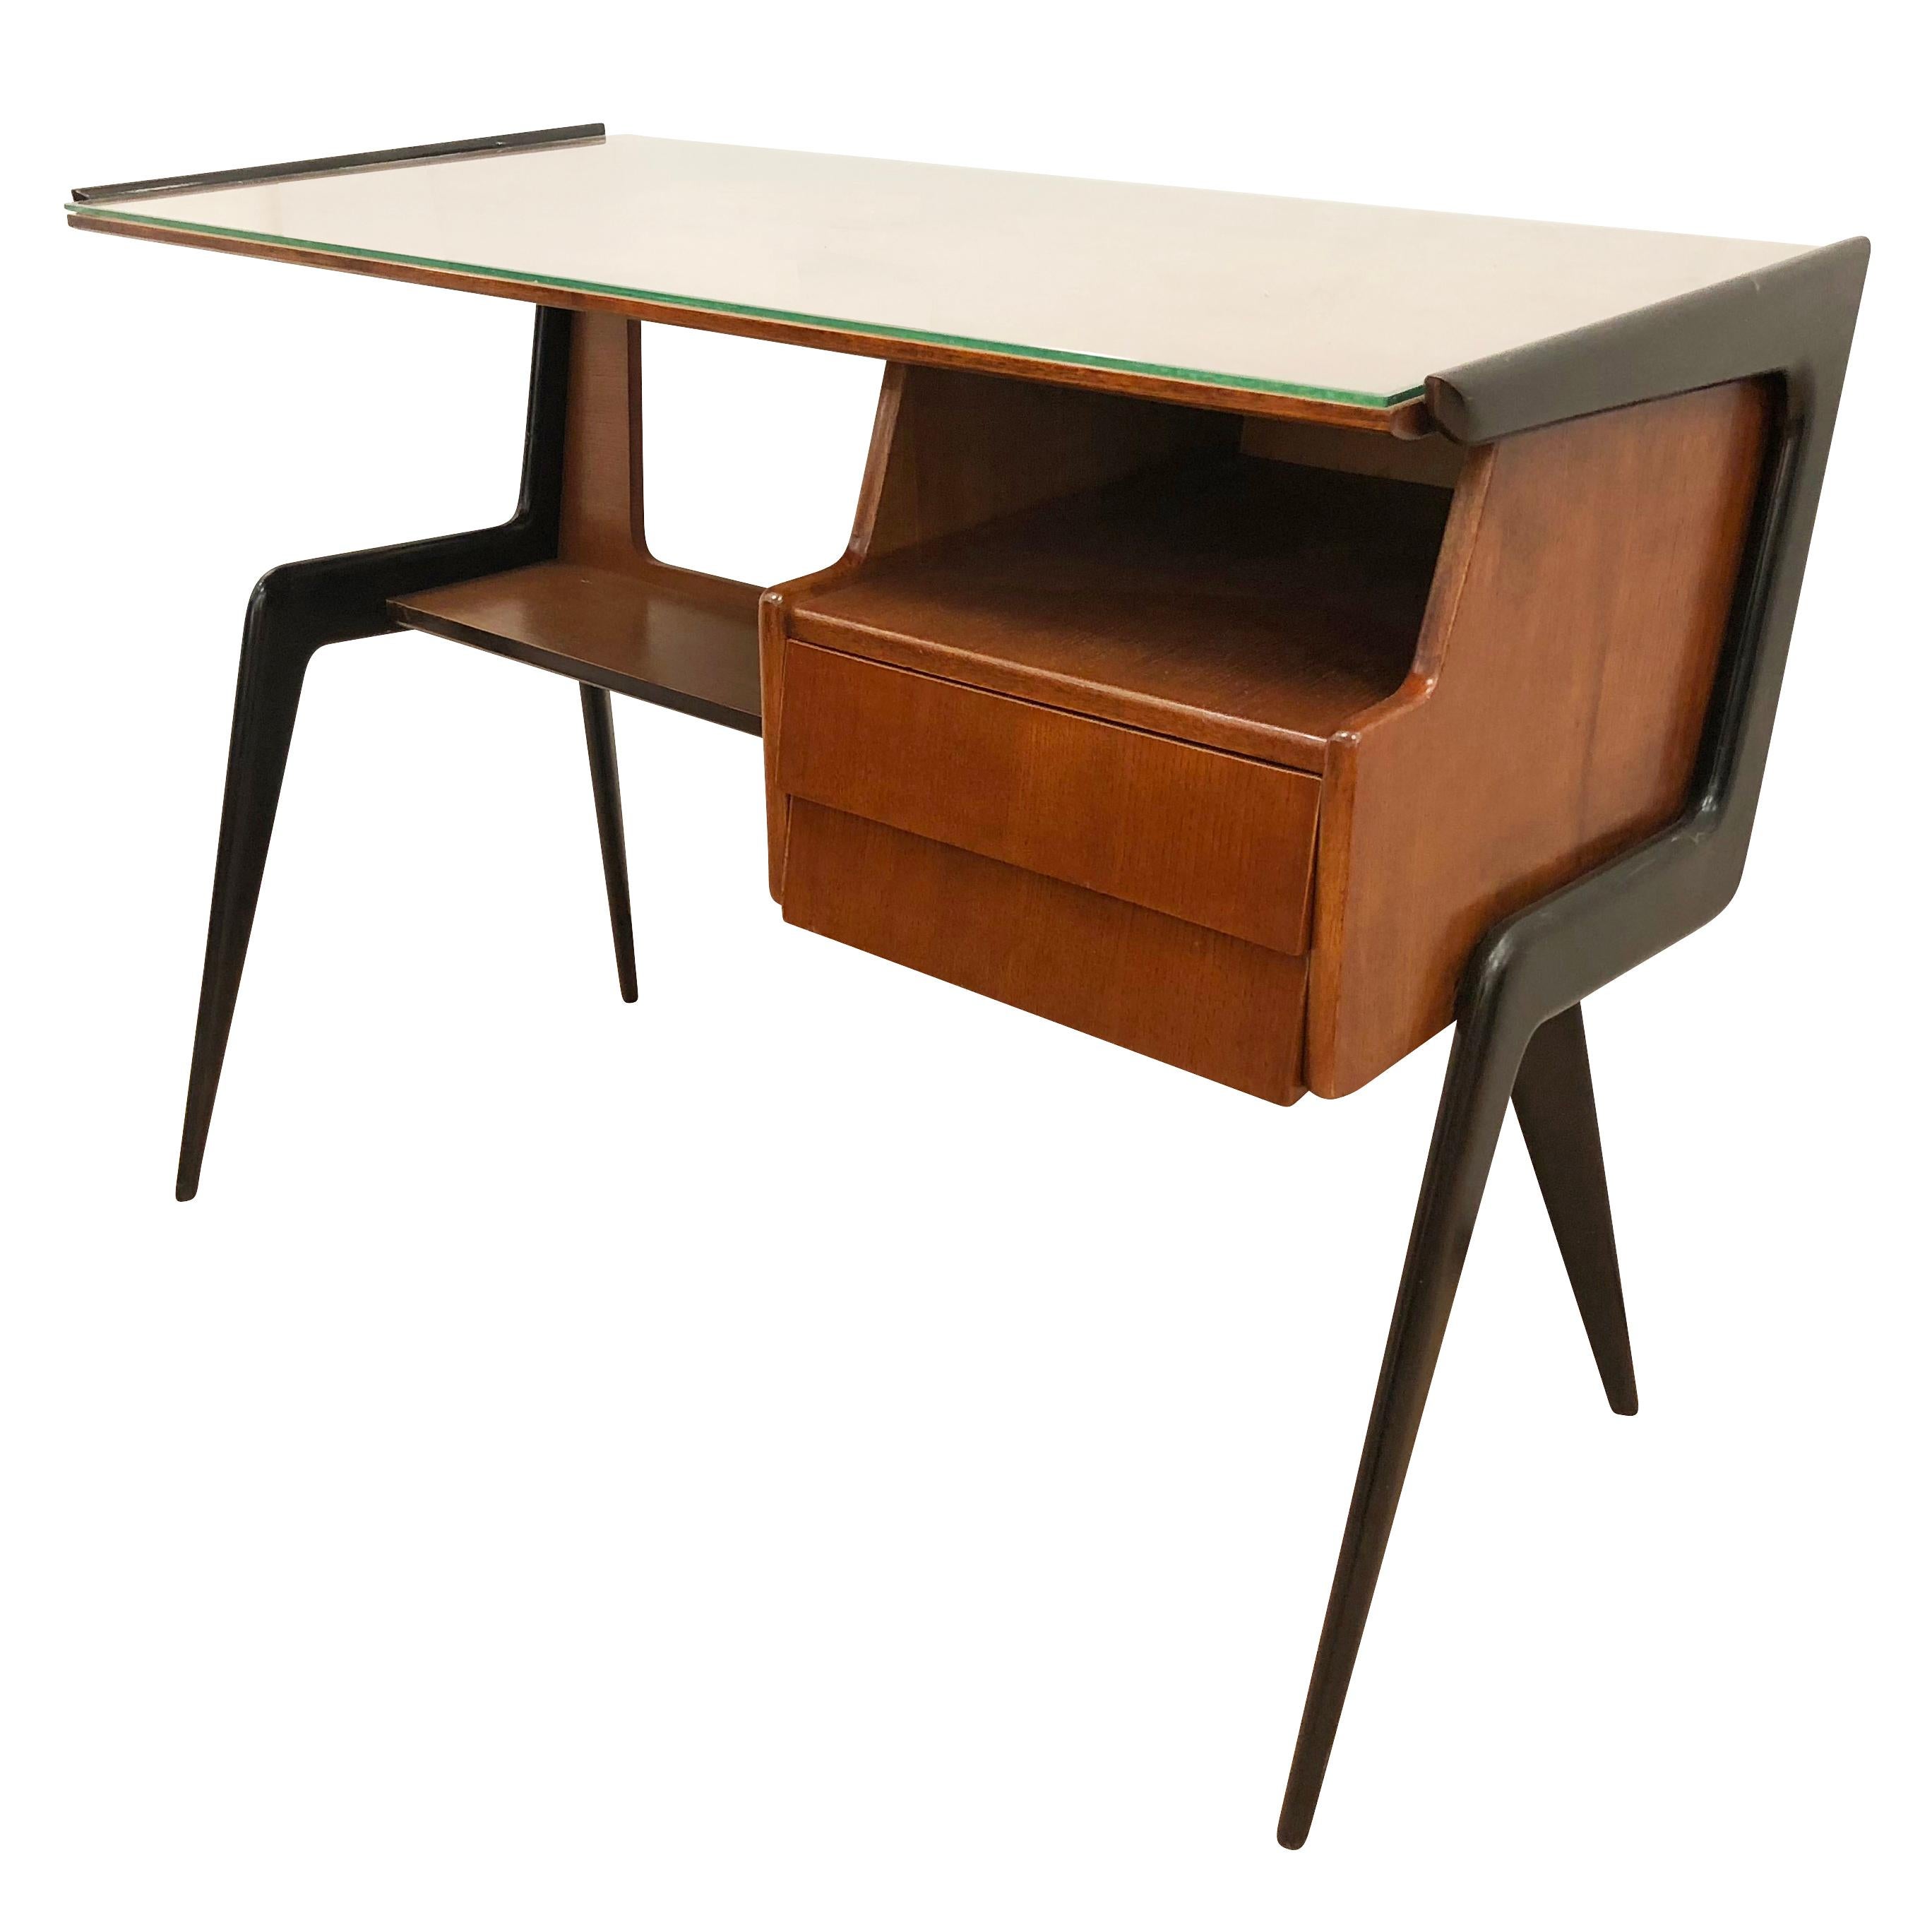 Beautiful Italian midcentury desk in the manner of Silvio Cavatorta. Walnut body with ebonized legs. Has a clear glass top and two drawers.

Condition: Excellent vintage condition, minor wear consistent with age and use. Recently